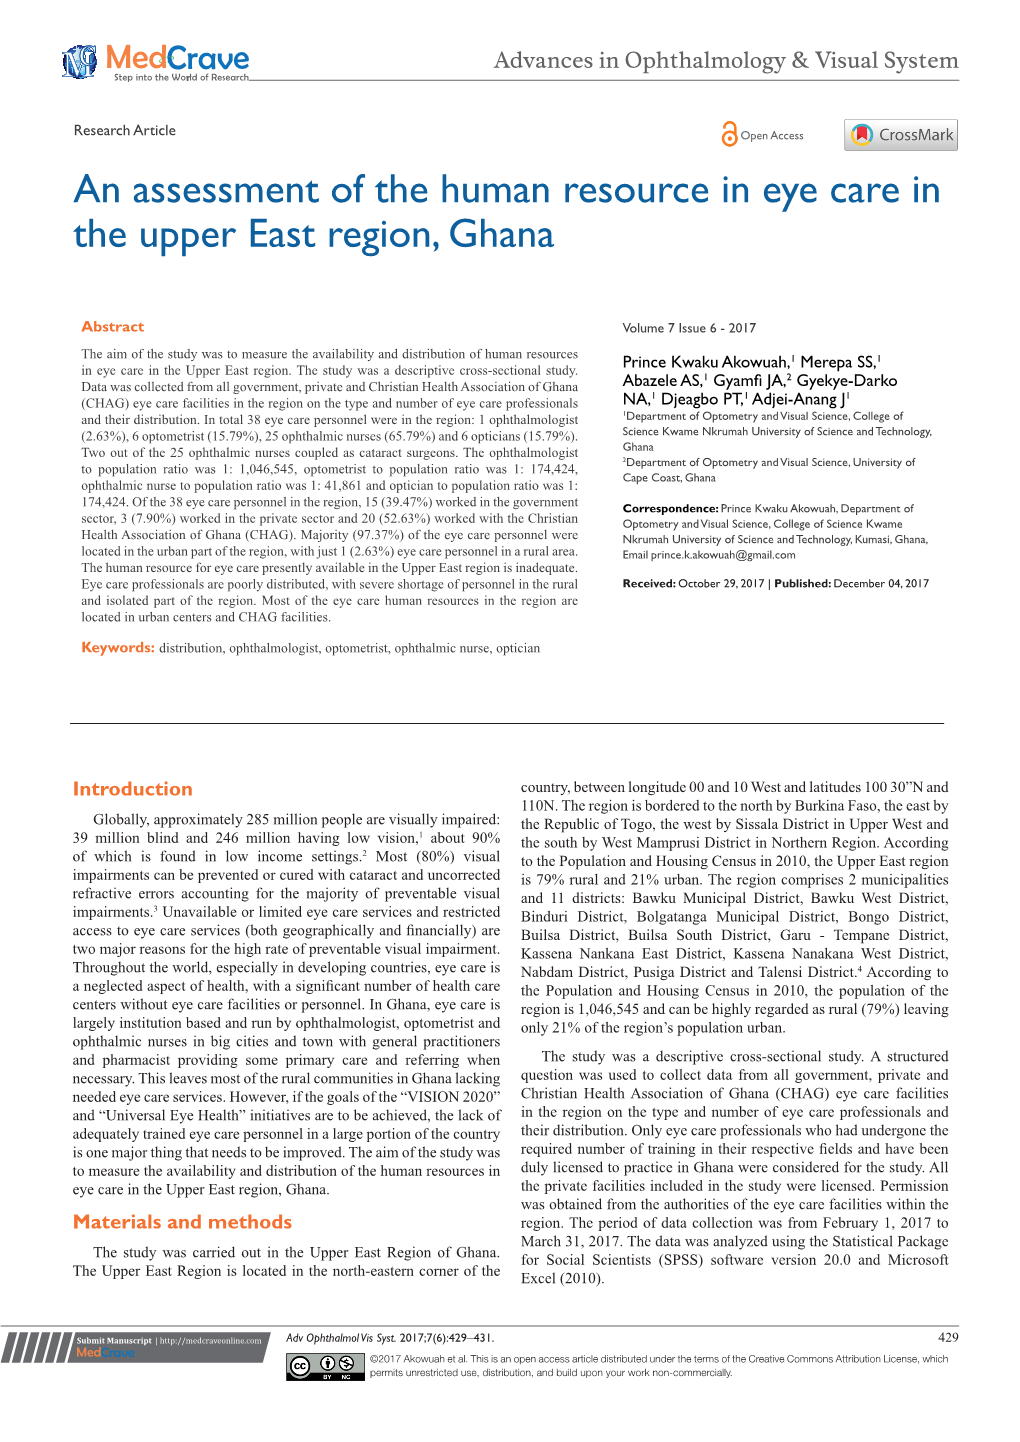 An Assessment of the Human Resource in Eye Care in the Upper East Region, Ghana